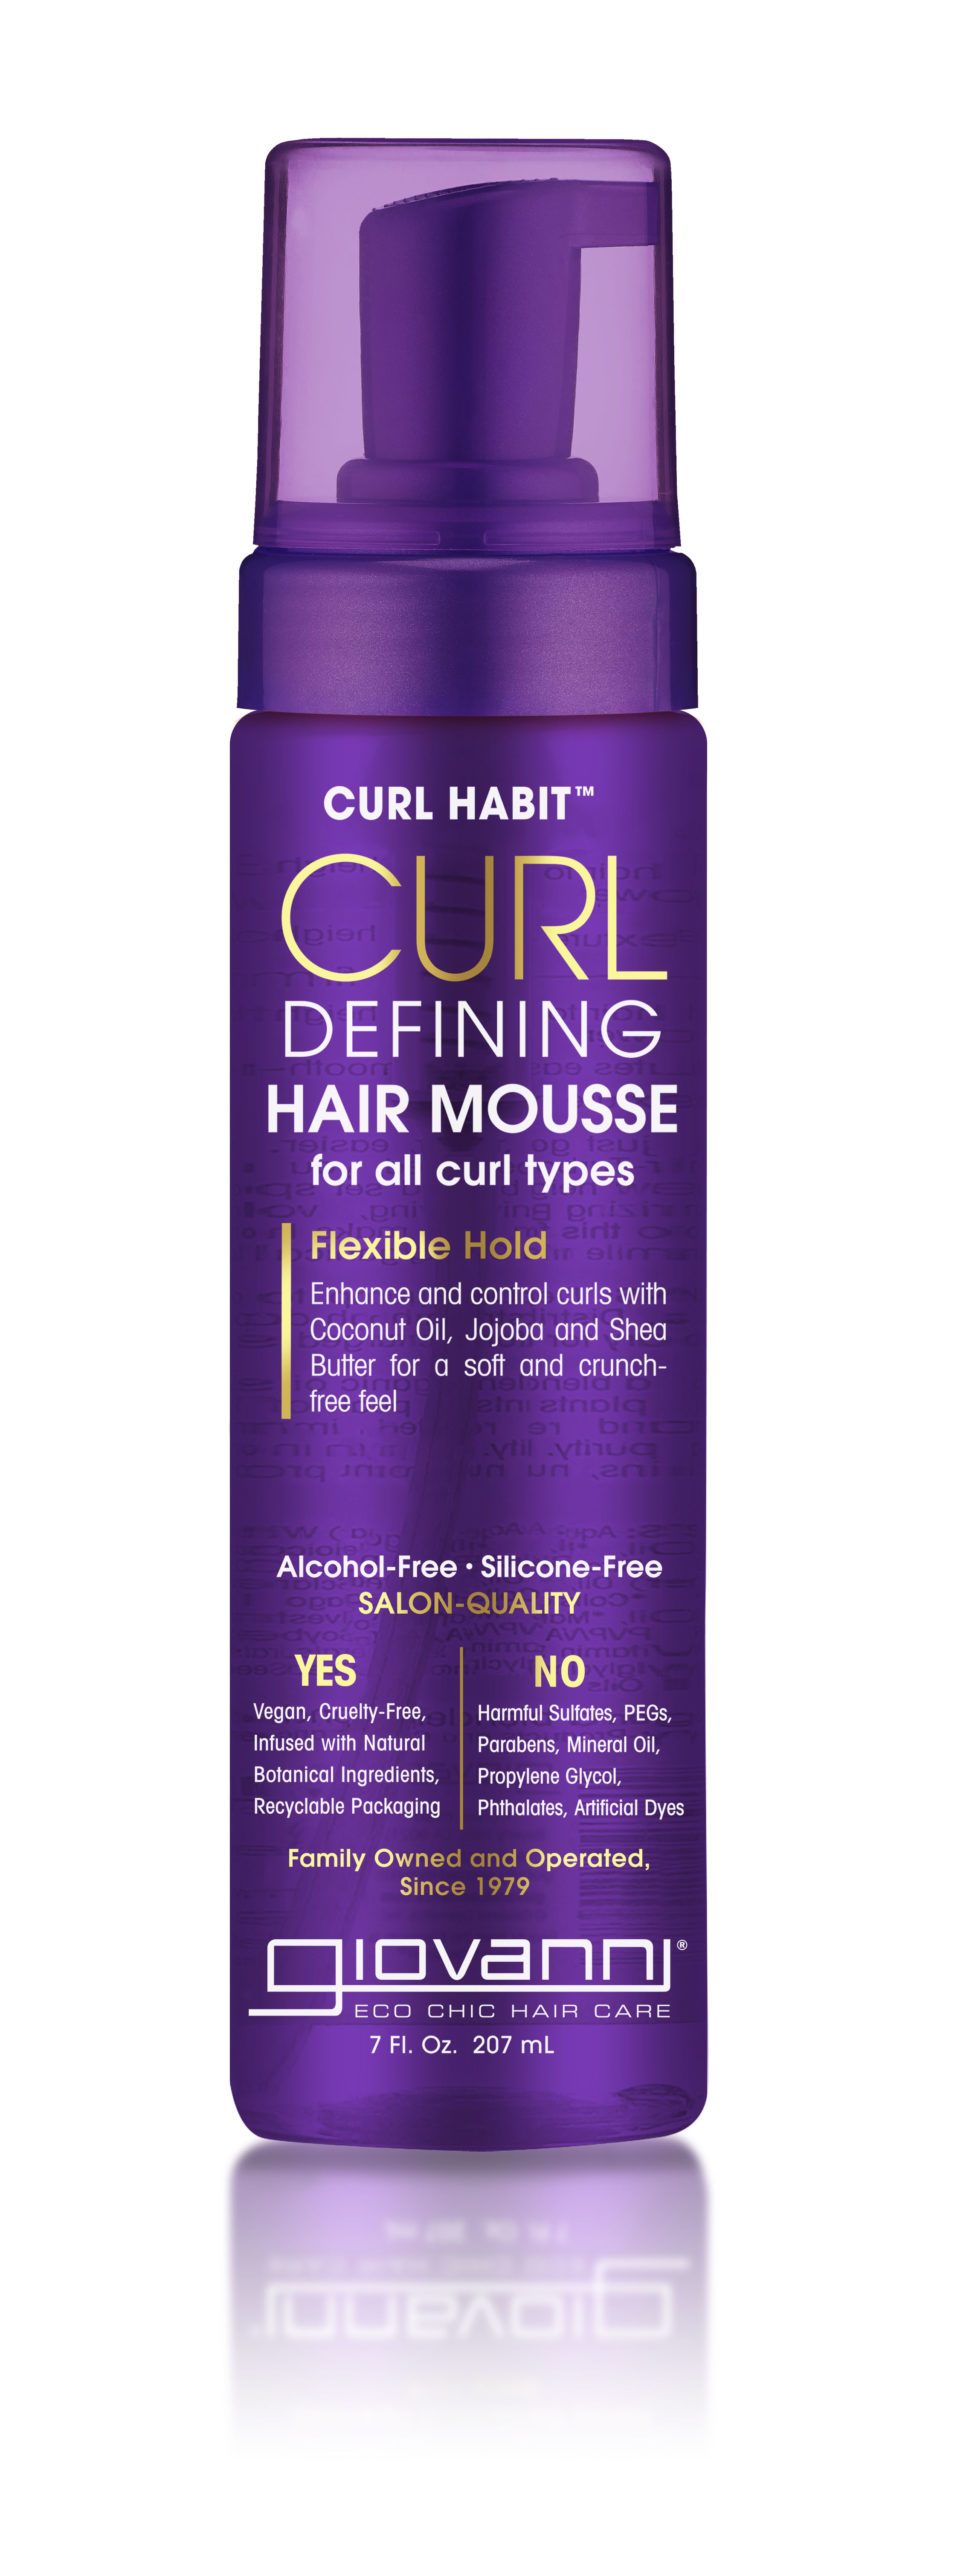 Giovanni Cosmetics Curl Defining Hair Mousse